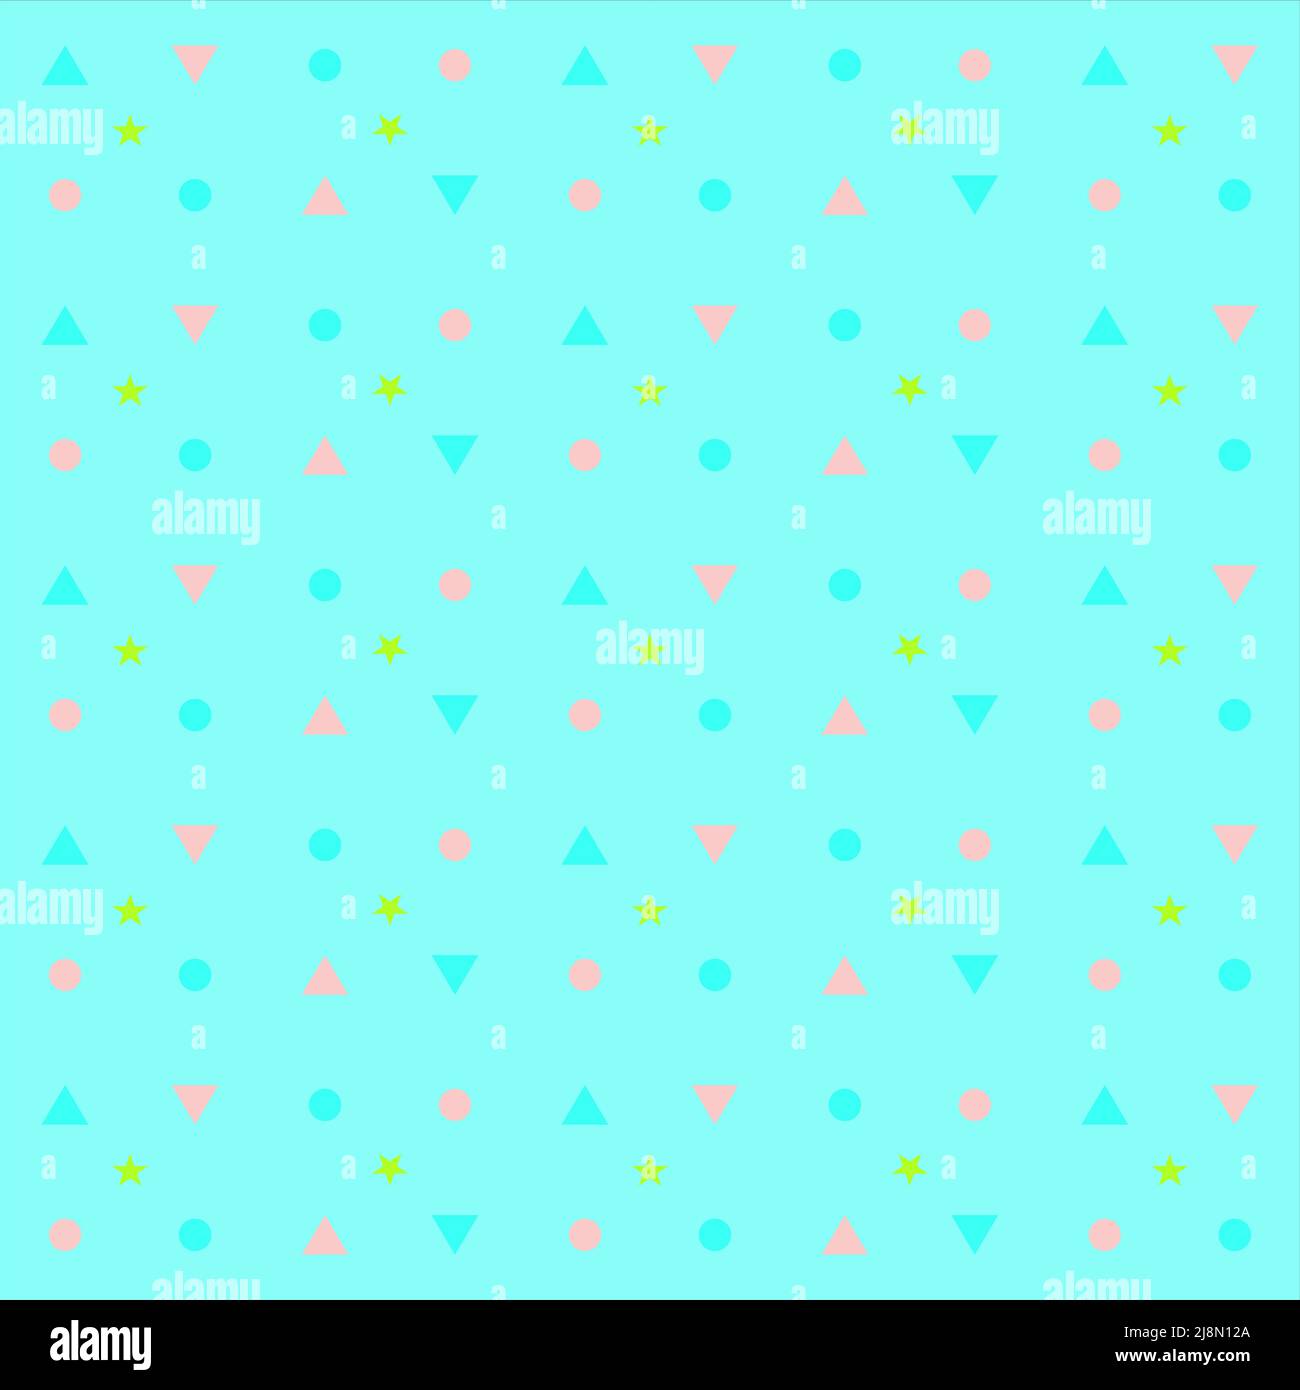 Plaid fabric textile textured paper abstract background wallpaper pattern seamless vector illustration Stock Vector